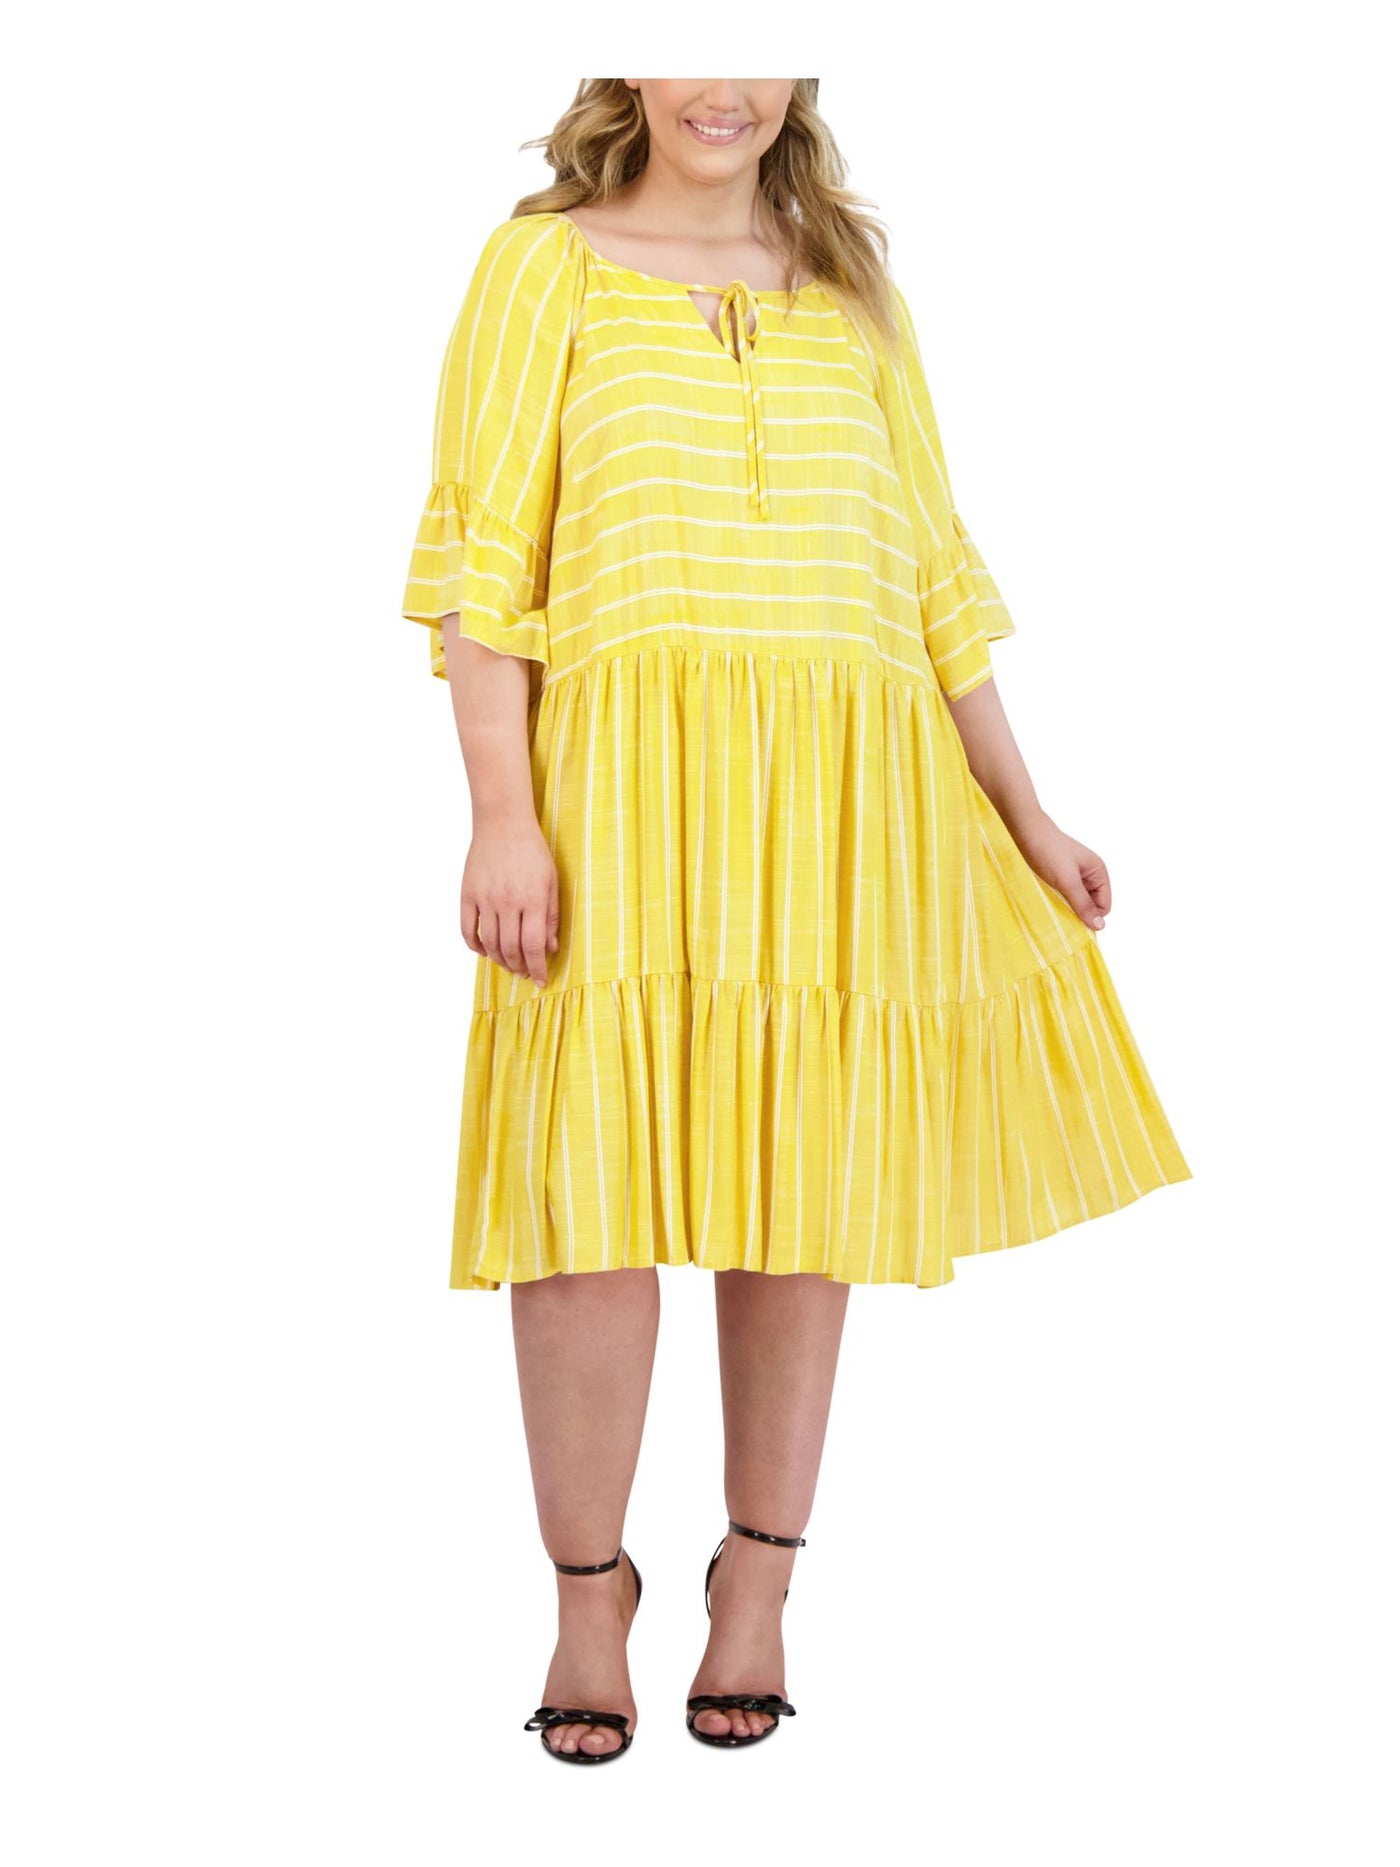 ROBBIE BEE Womens Yellow Tie Ruffled Unlined Striped 3/4 Sleeve V Neck Knee Length A-Line Dress Plus 22W